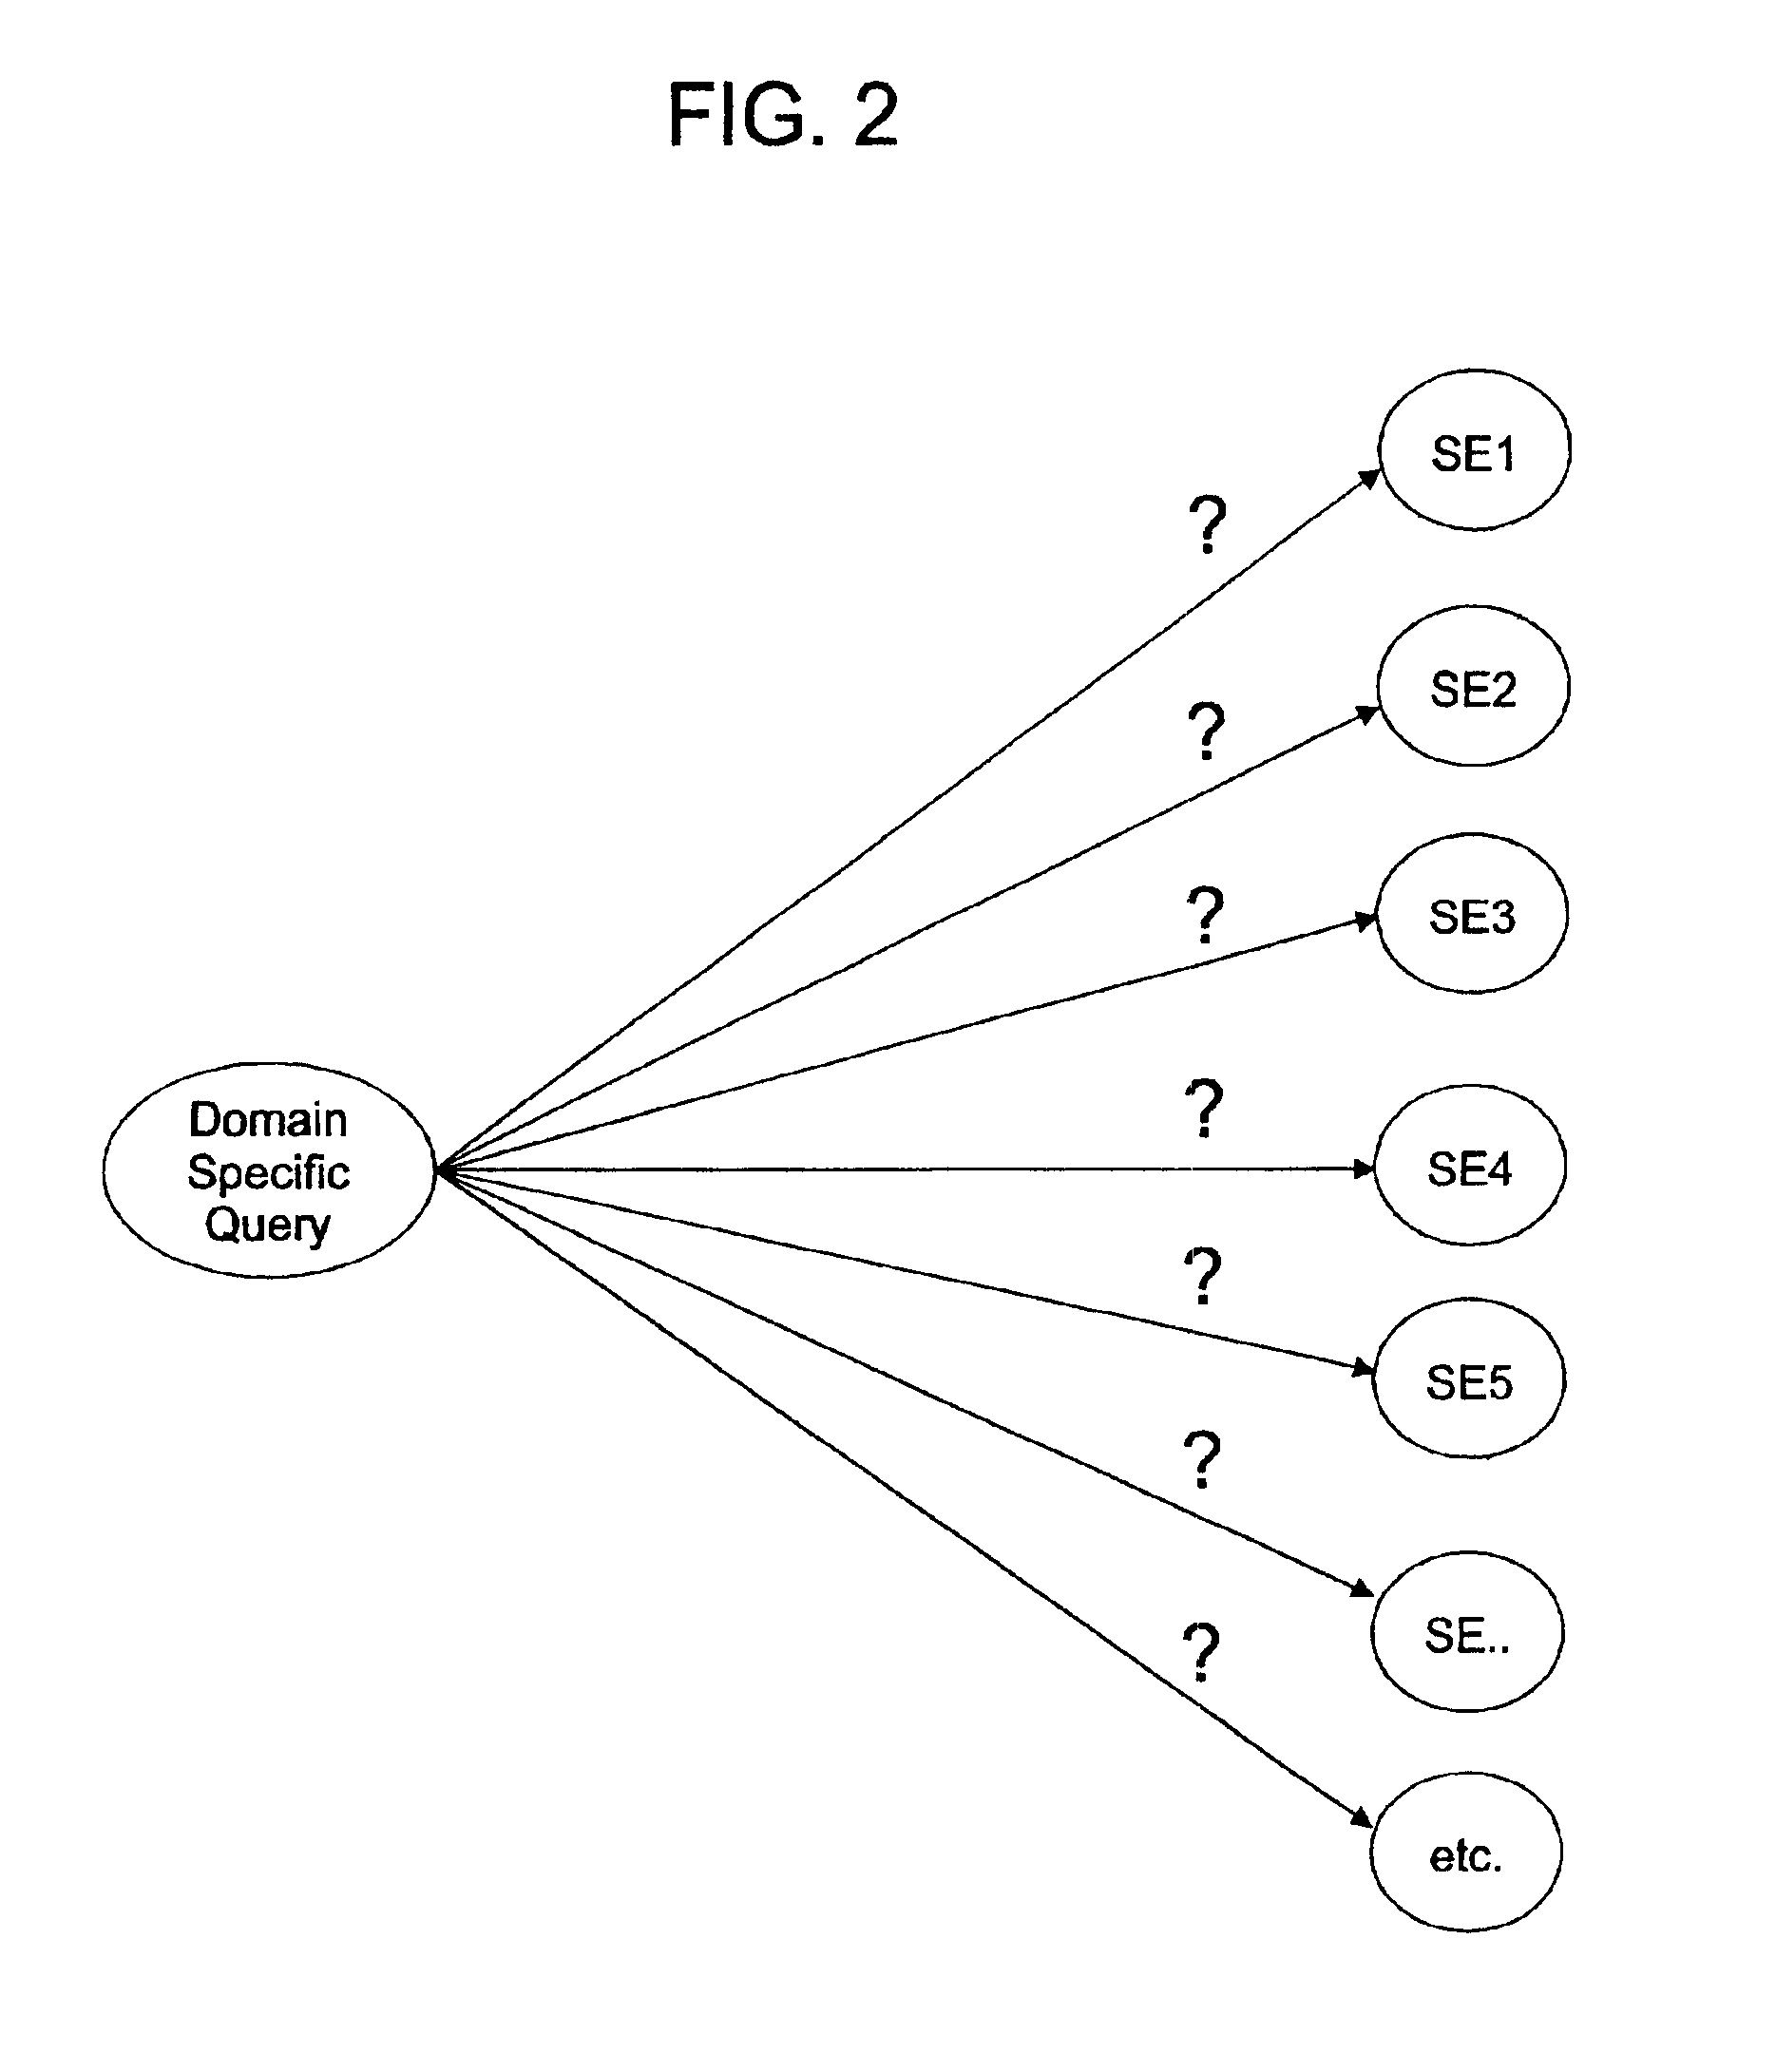 Query routing based on feature learning of data sources